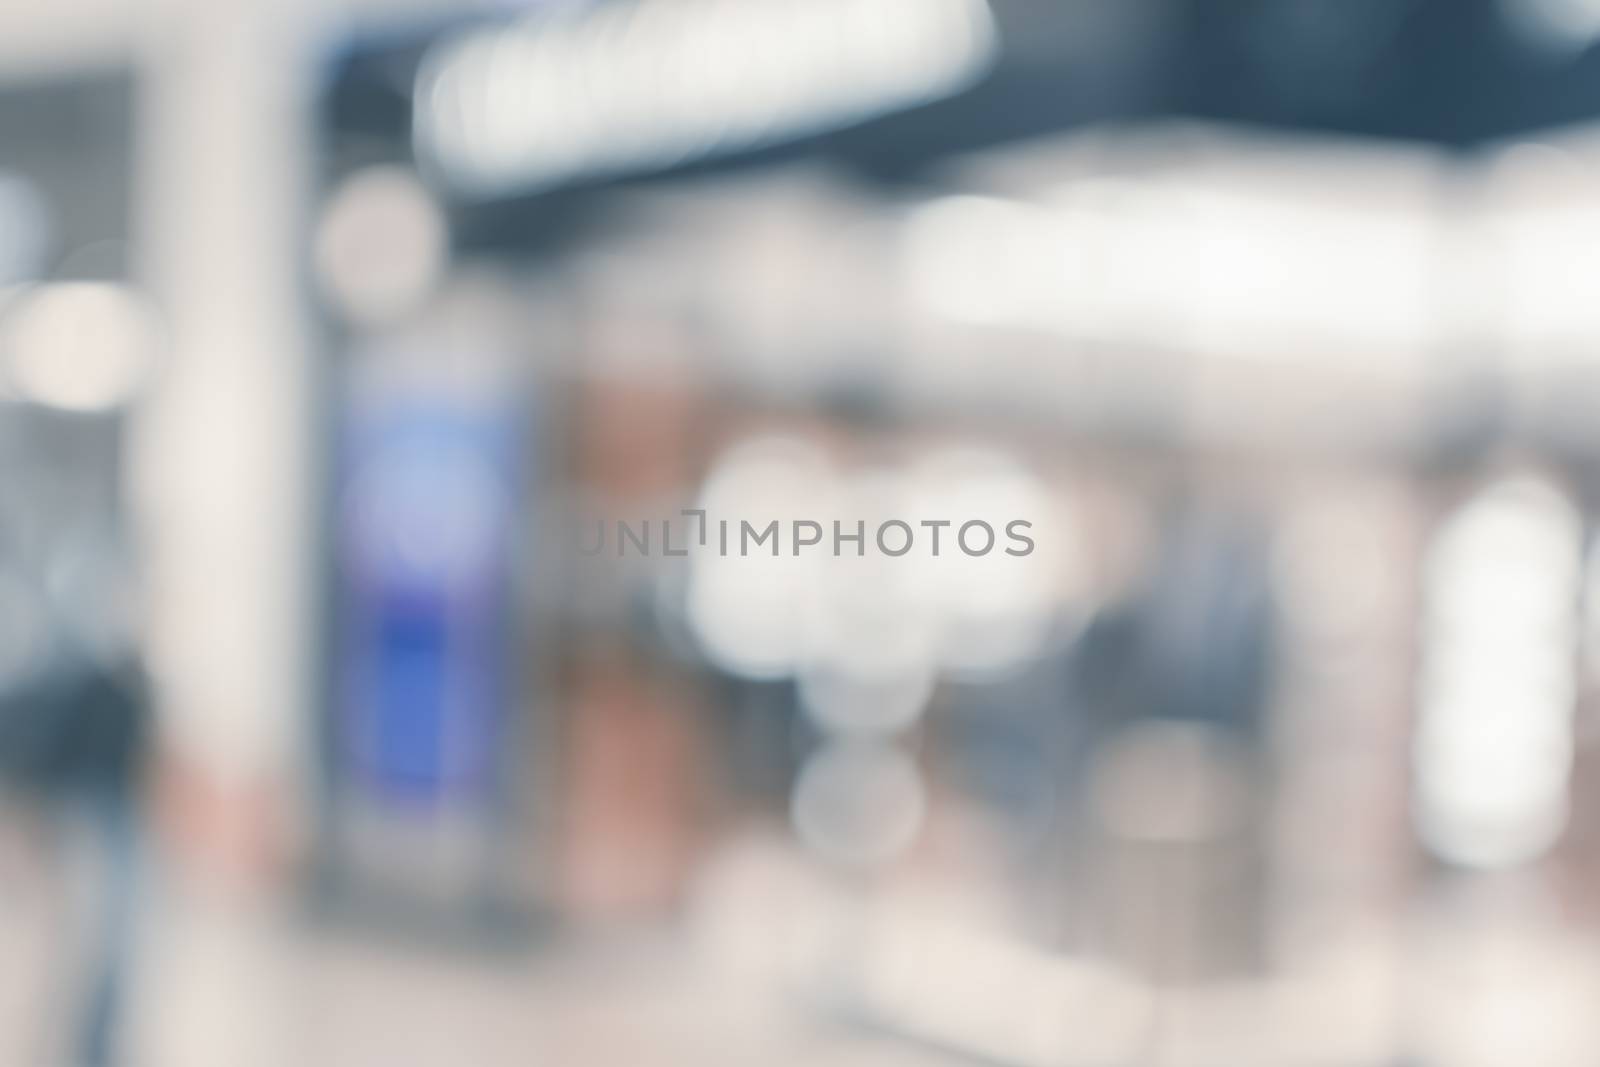 Abstract background of shopping mall by elwynn